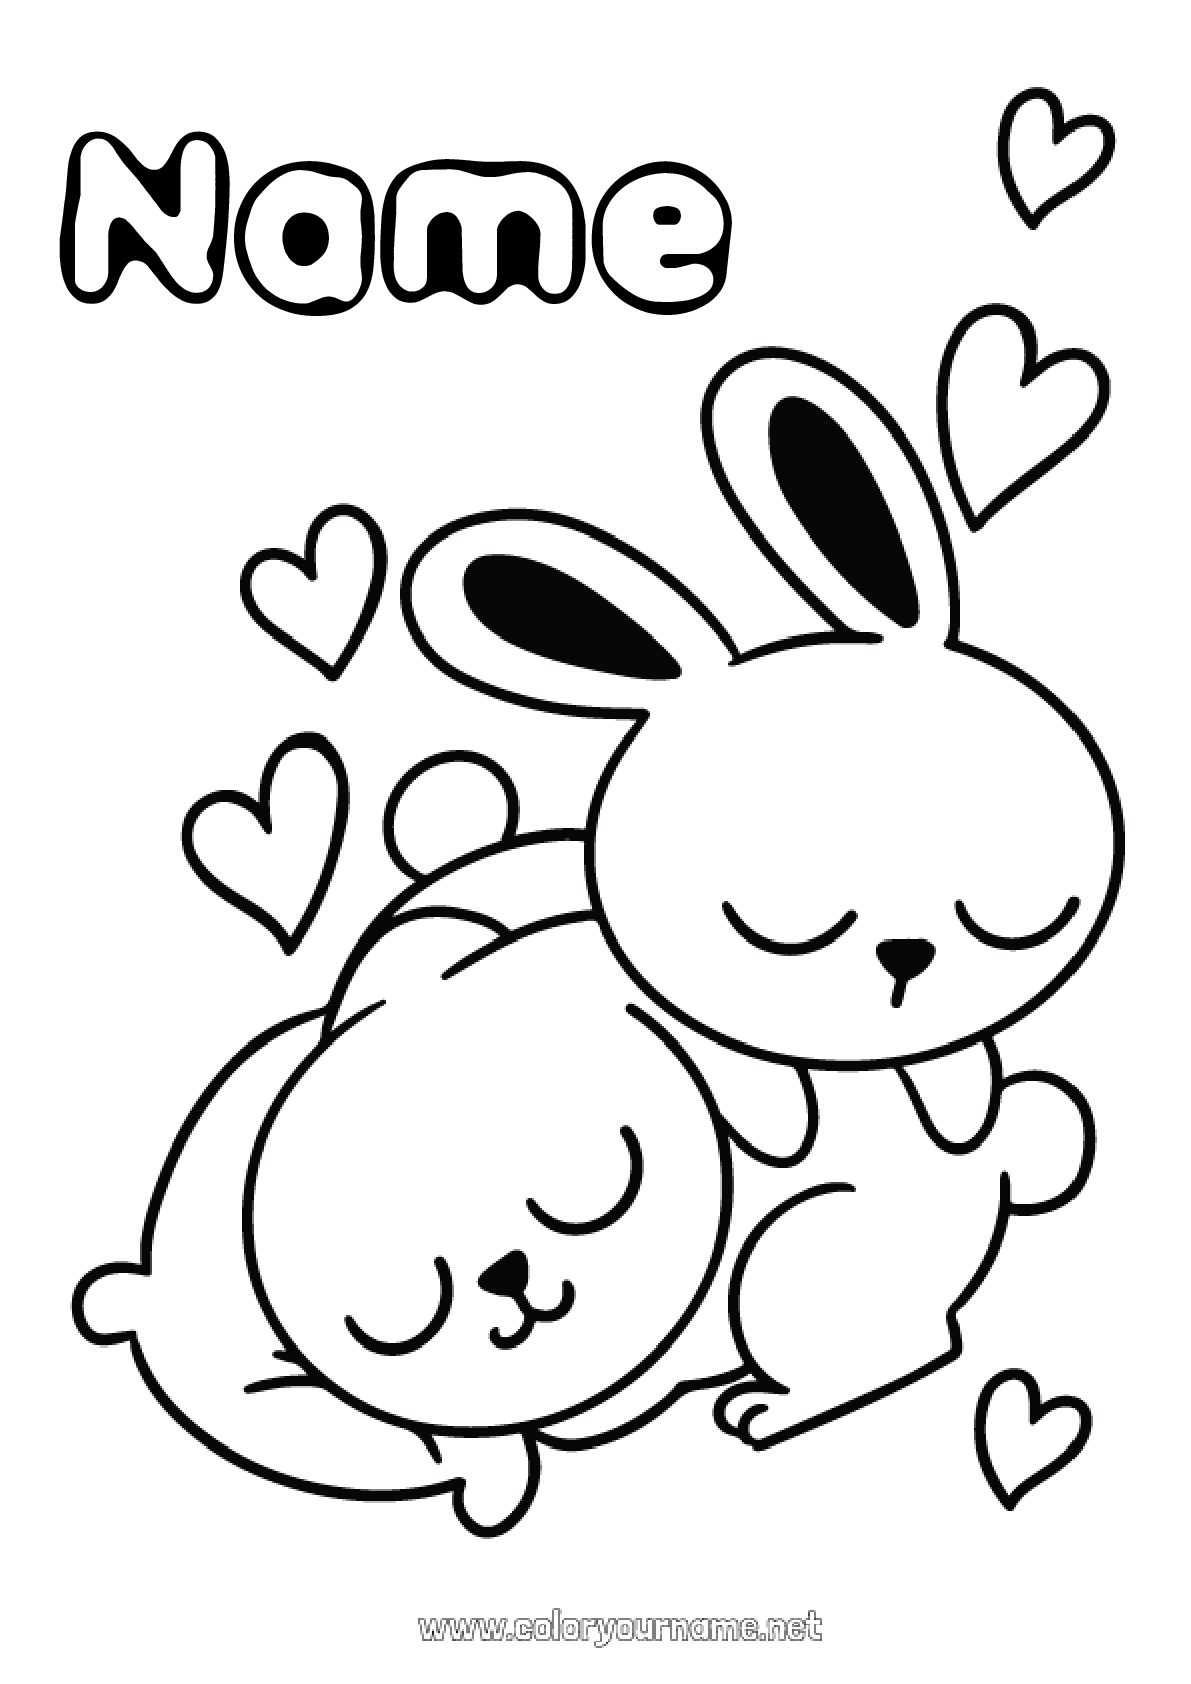 Coloring page No.897 - Heart I love you Bunny